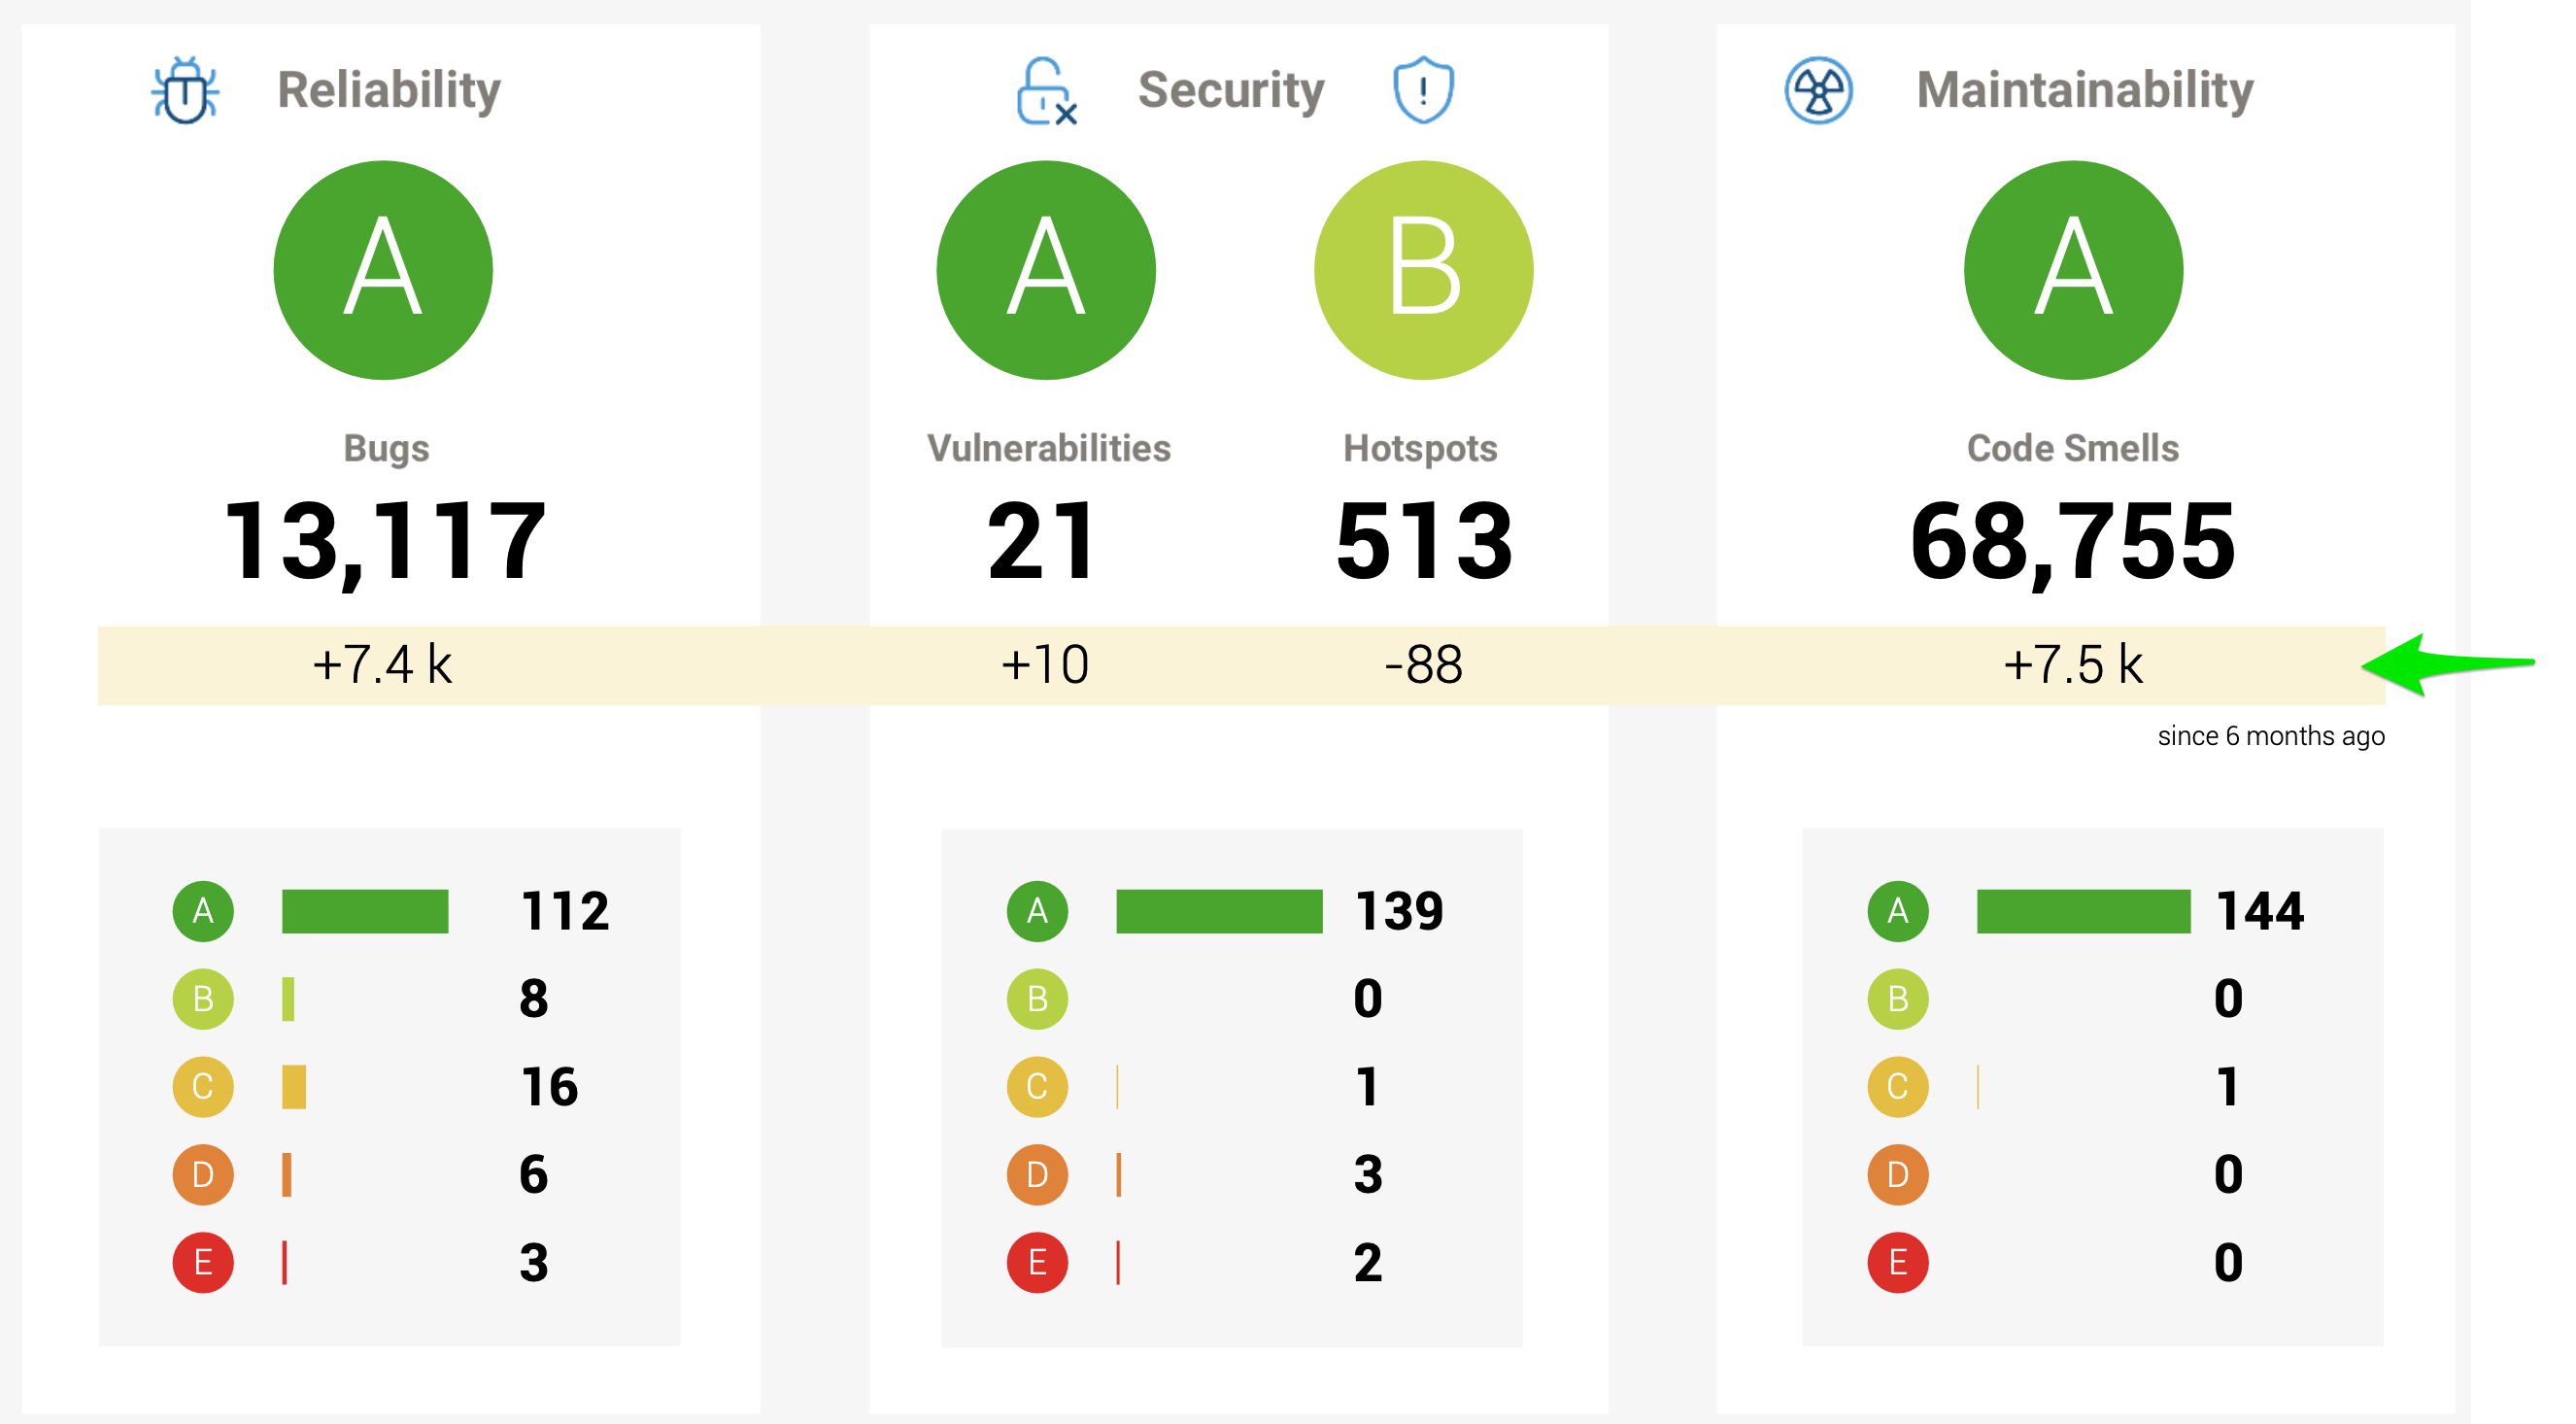 Overview Report for SonarCloud 1.2: health rating, differential values, and quality gates cover